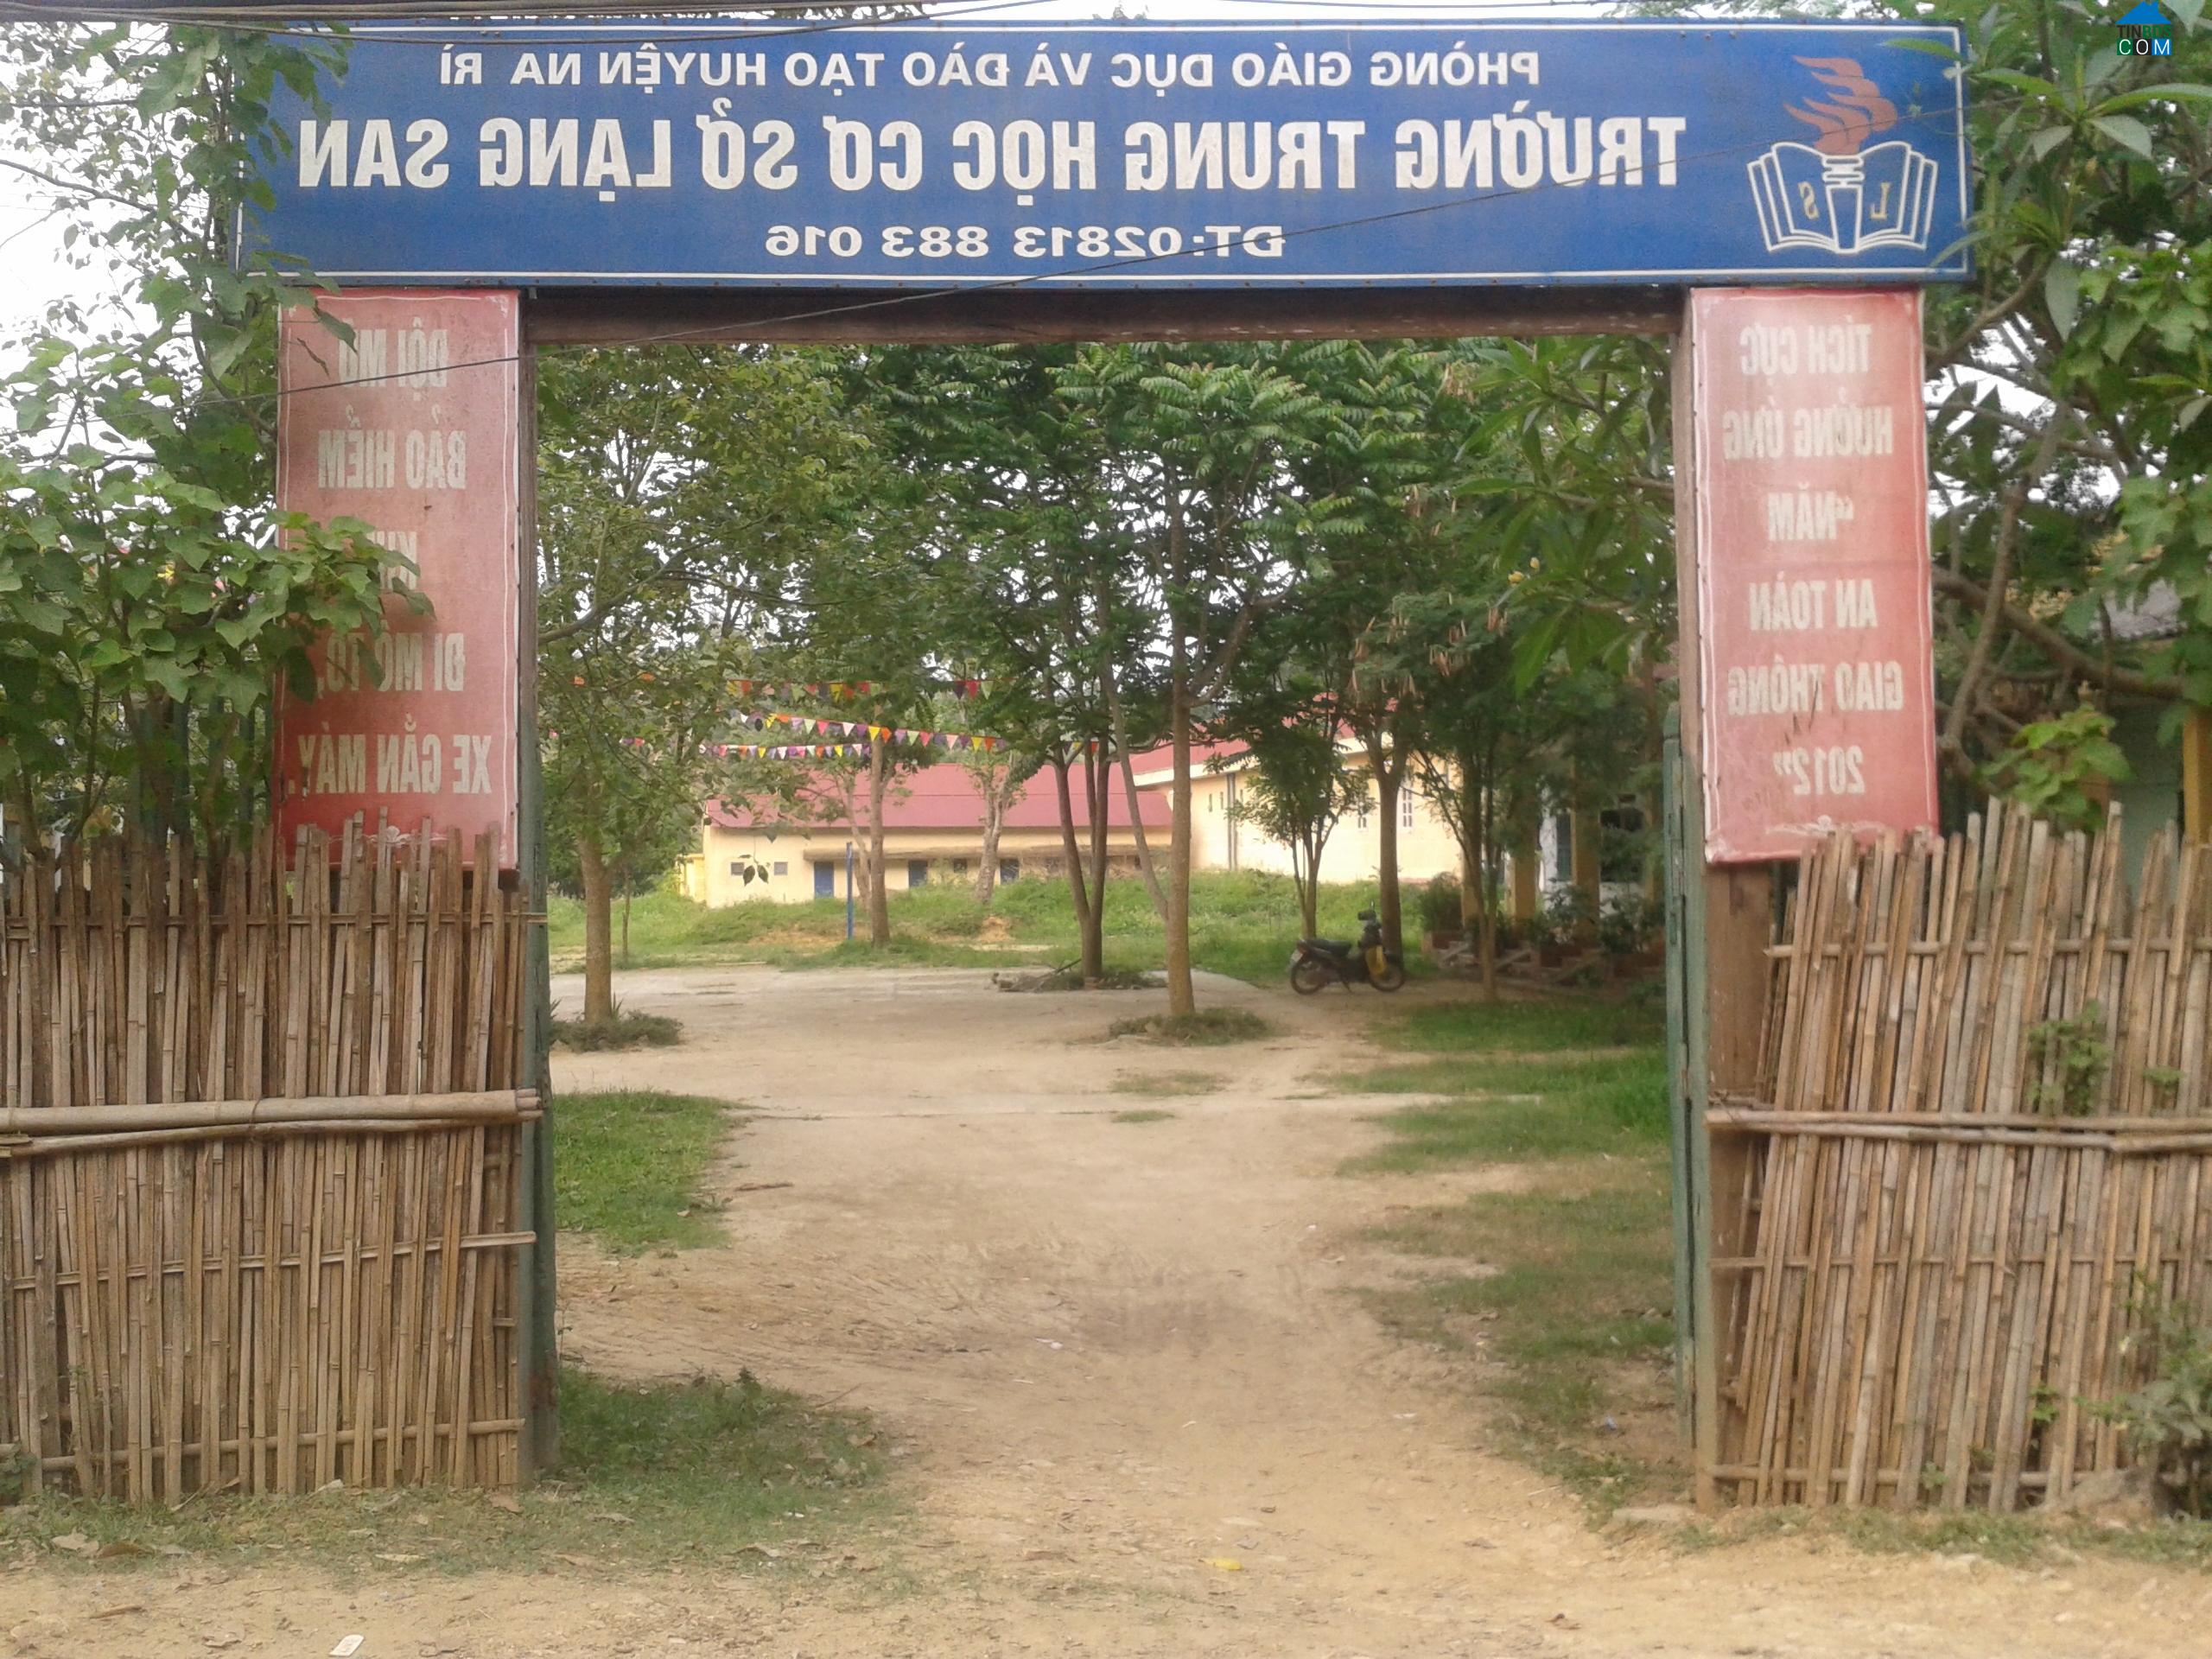 Image of List companies in Lang San Town- Na Ri District- Bac Kan